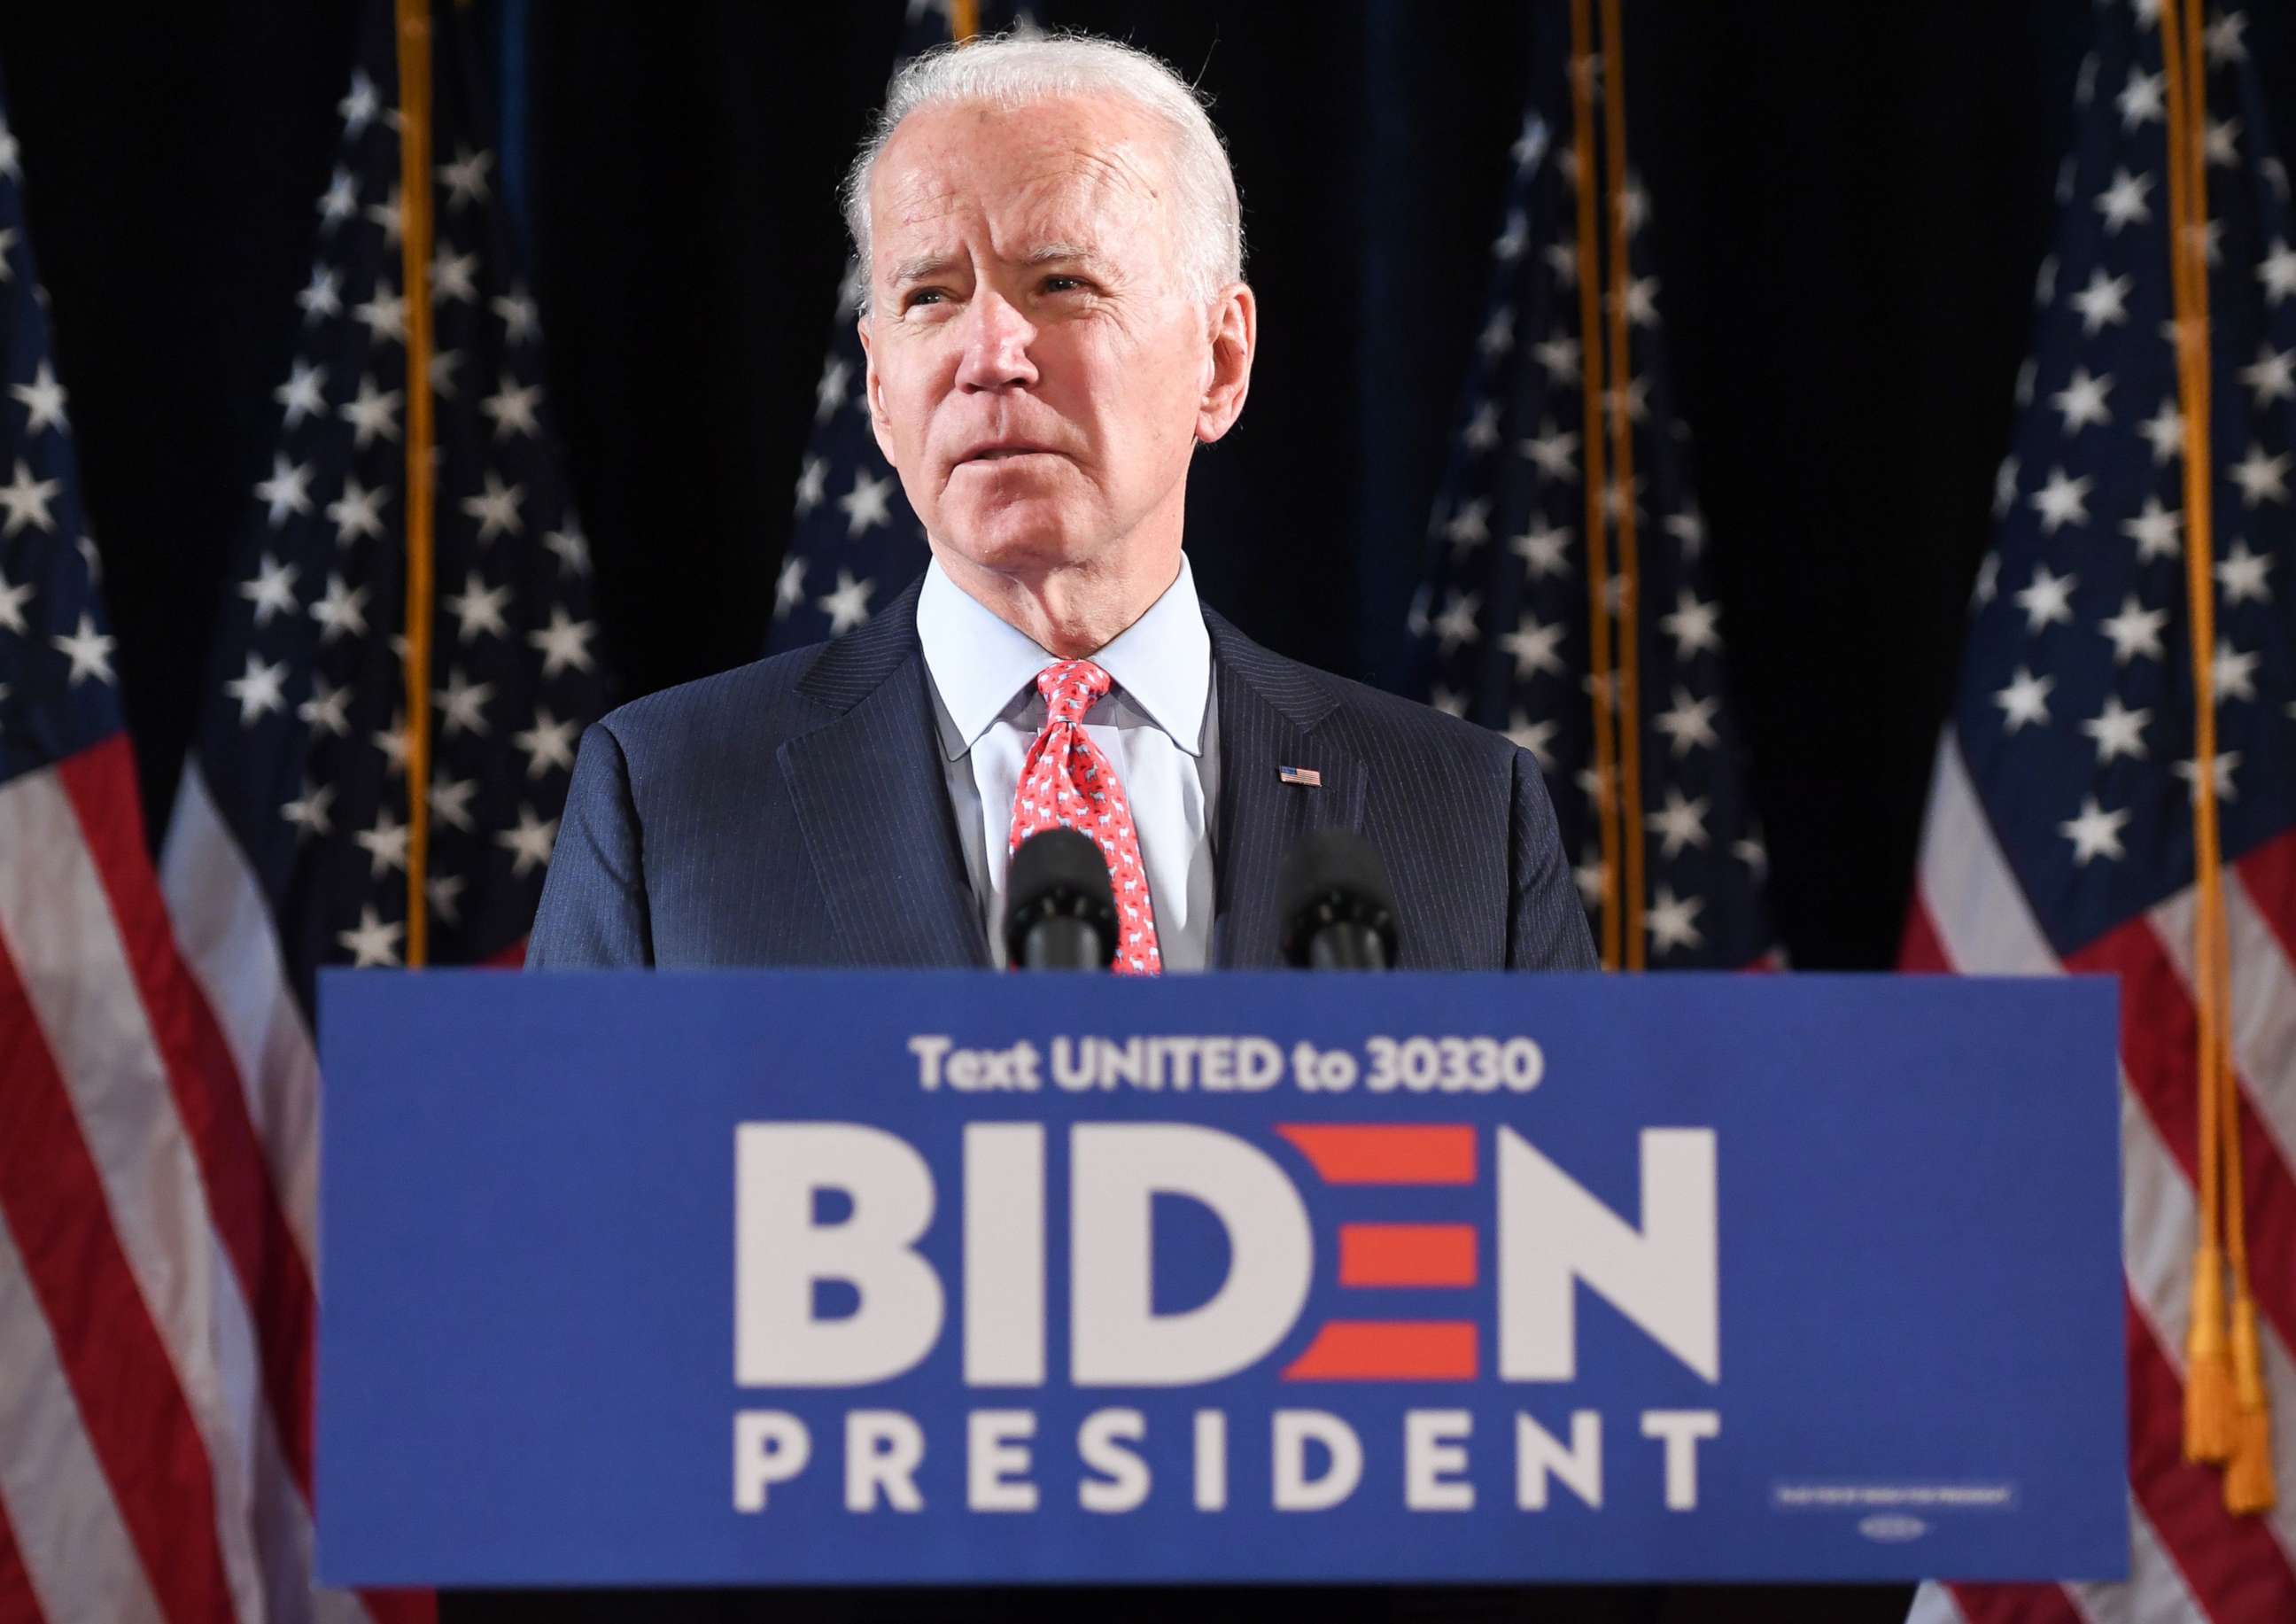 PHOTO: Former Vice President and Democratic presidential hopeful Joe Biden speaks about COVID-19, known as the Coronavirus, during a press event in Wilmington, Del., March 12, 2020.